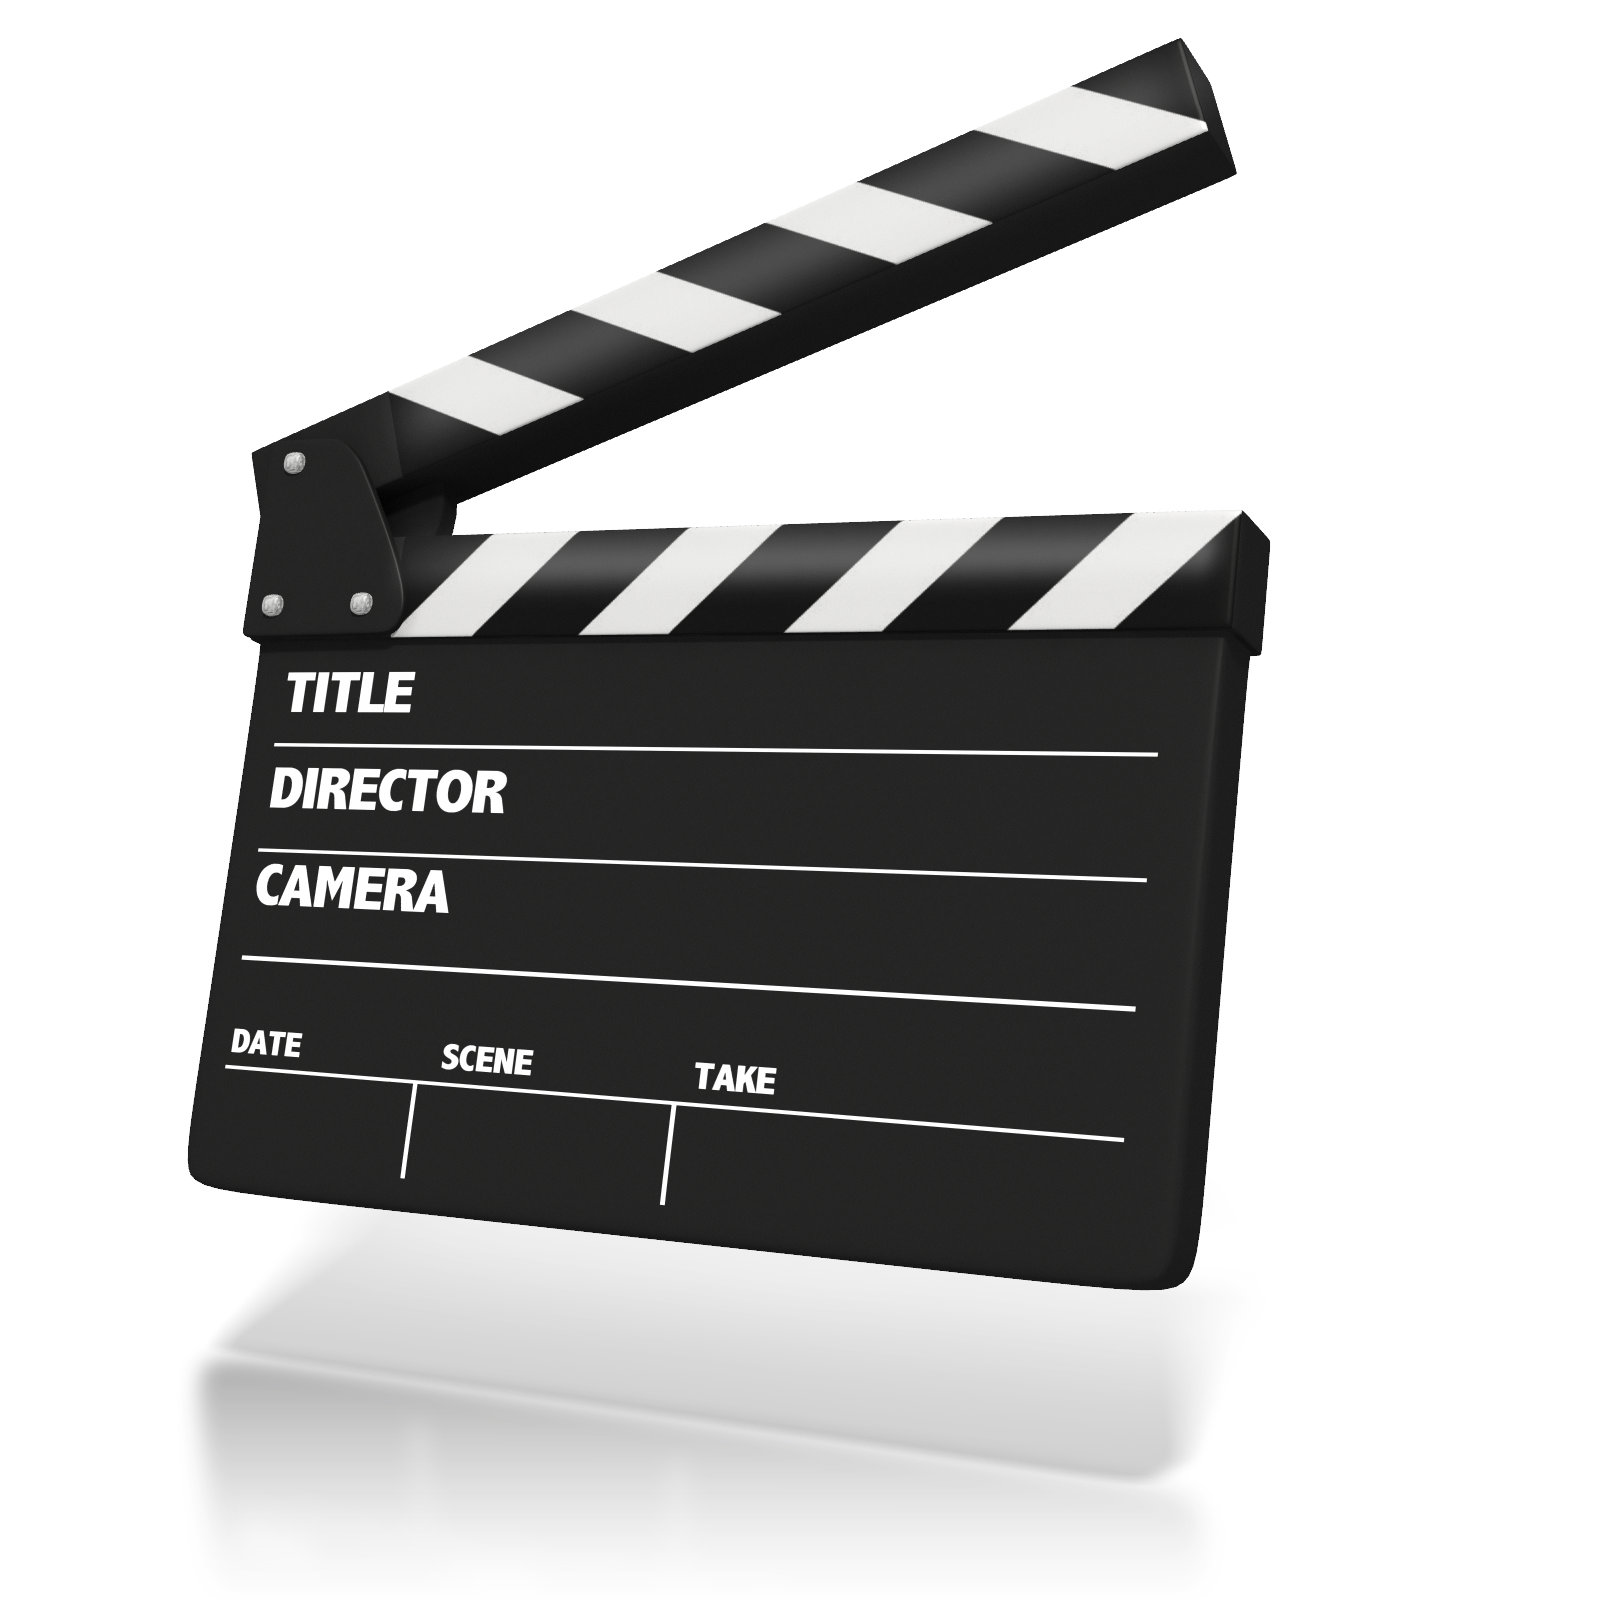 Theatre Movie Clapping Animation Presentation Clapperboard Clipart